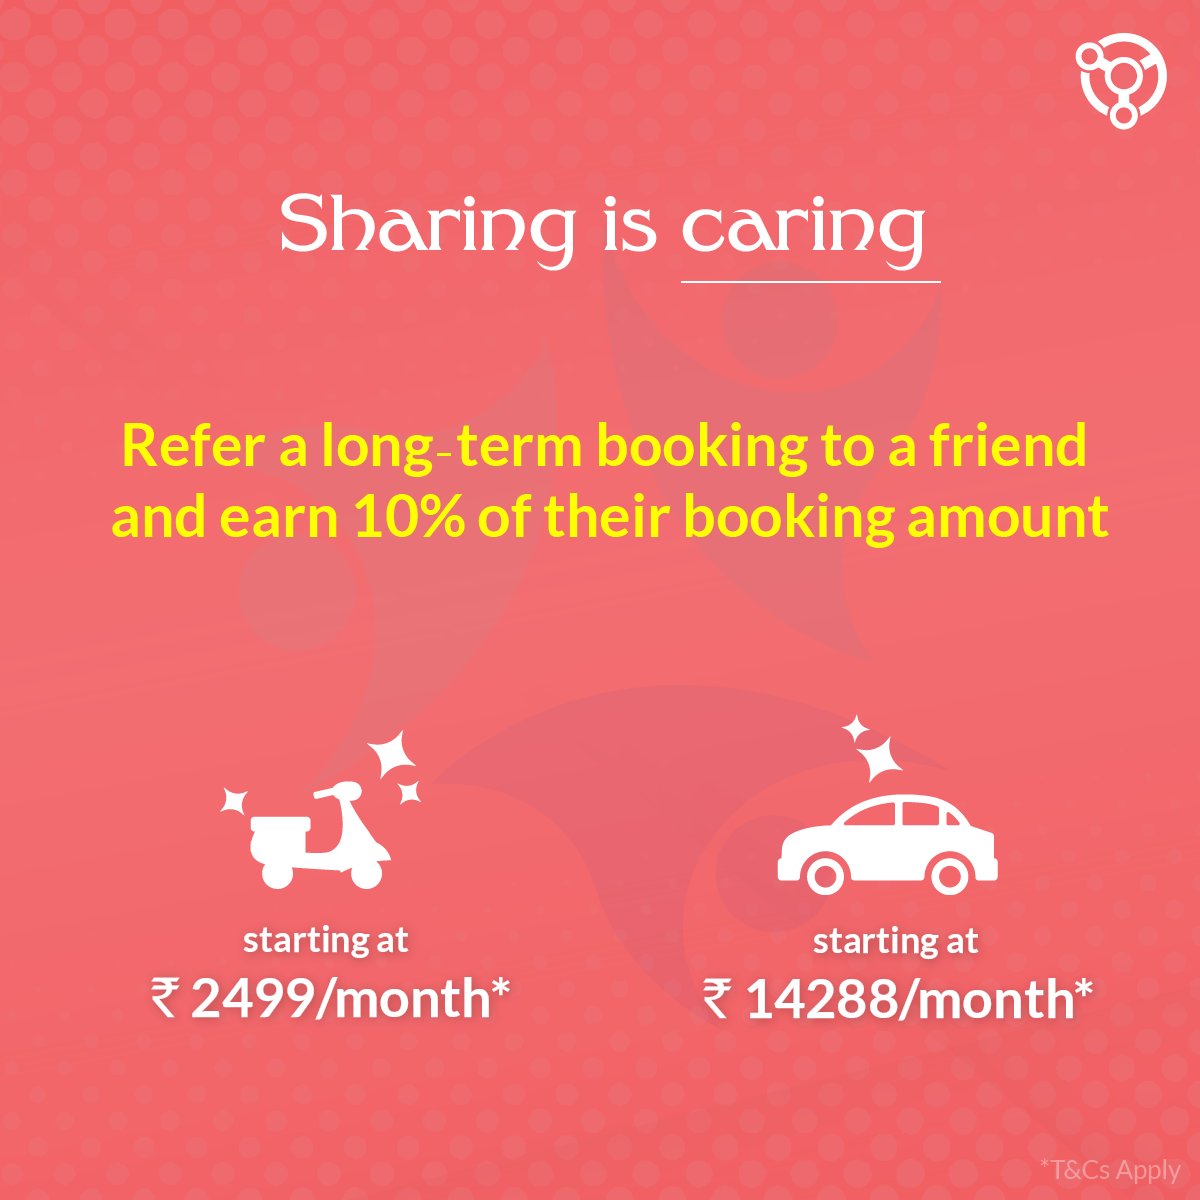 That's right, get FLAT 10% of your friend's booking amount when they sign up using your referral code and make a 7,15 or 30 days booking. Visit 'Invite and Earn' page on our app/website to start referring! #covid19india #bikerentals #carrentals #referrals #lockdownindia